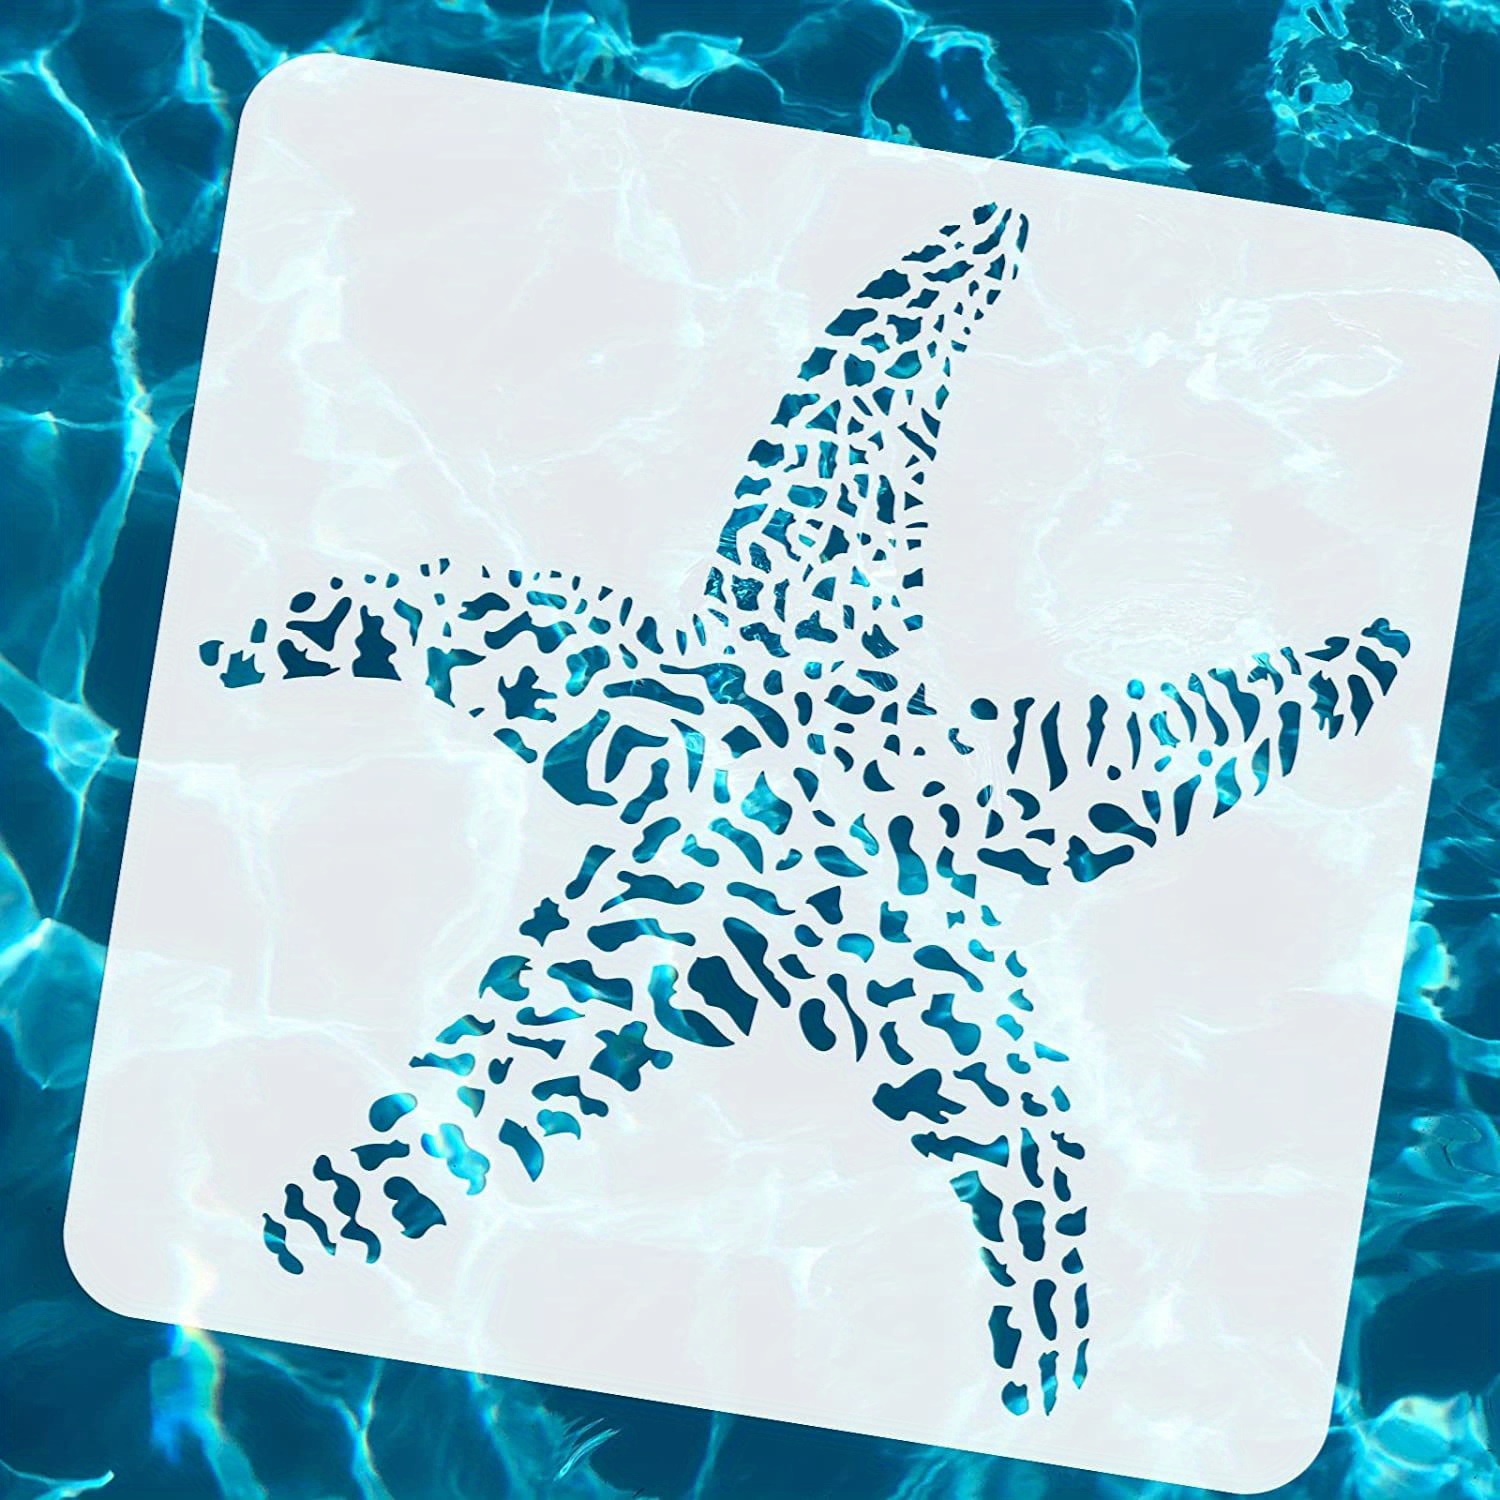 Ocean Heart And Starfish Number Painting For Adults - Temu